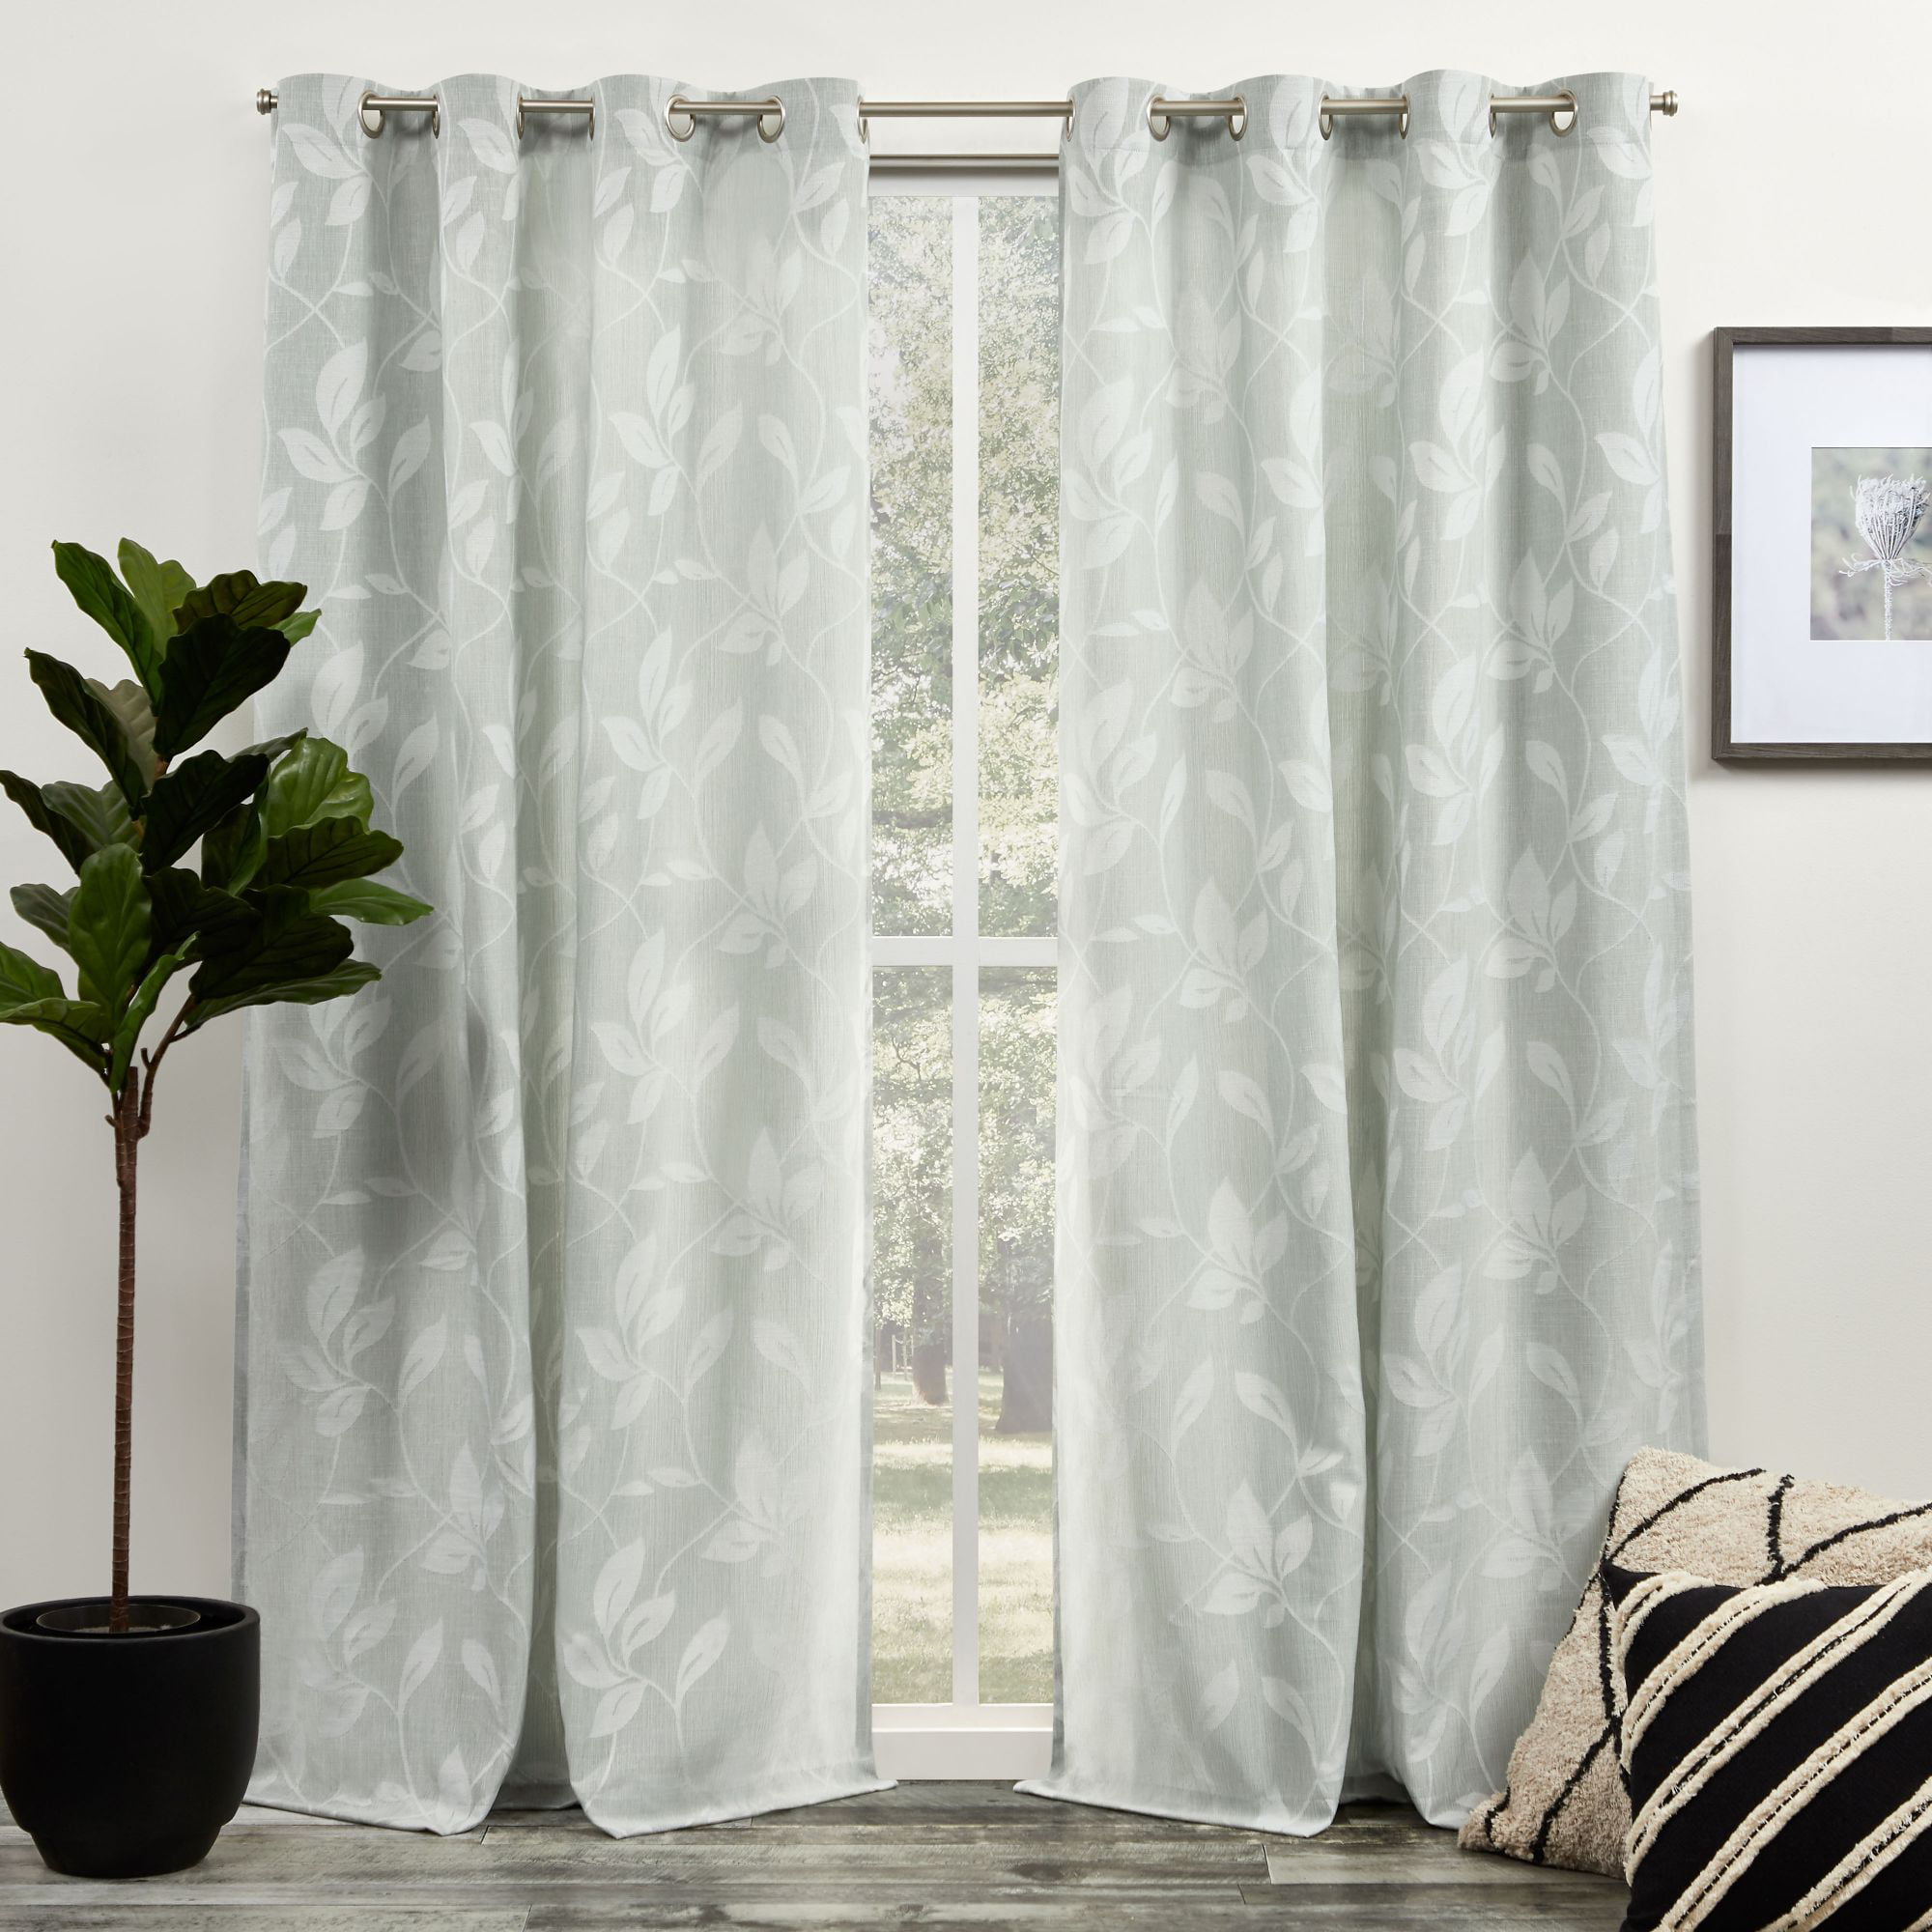 Grey 54x84 Exclusive Home Curtains Skylar Light Filtering Grommet Top Curtain Panels